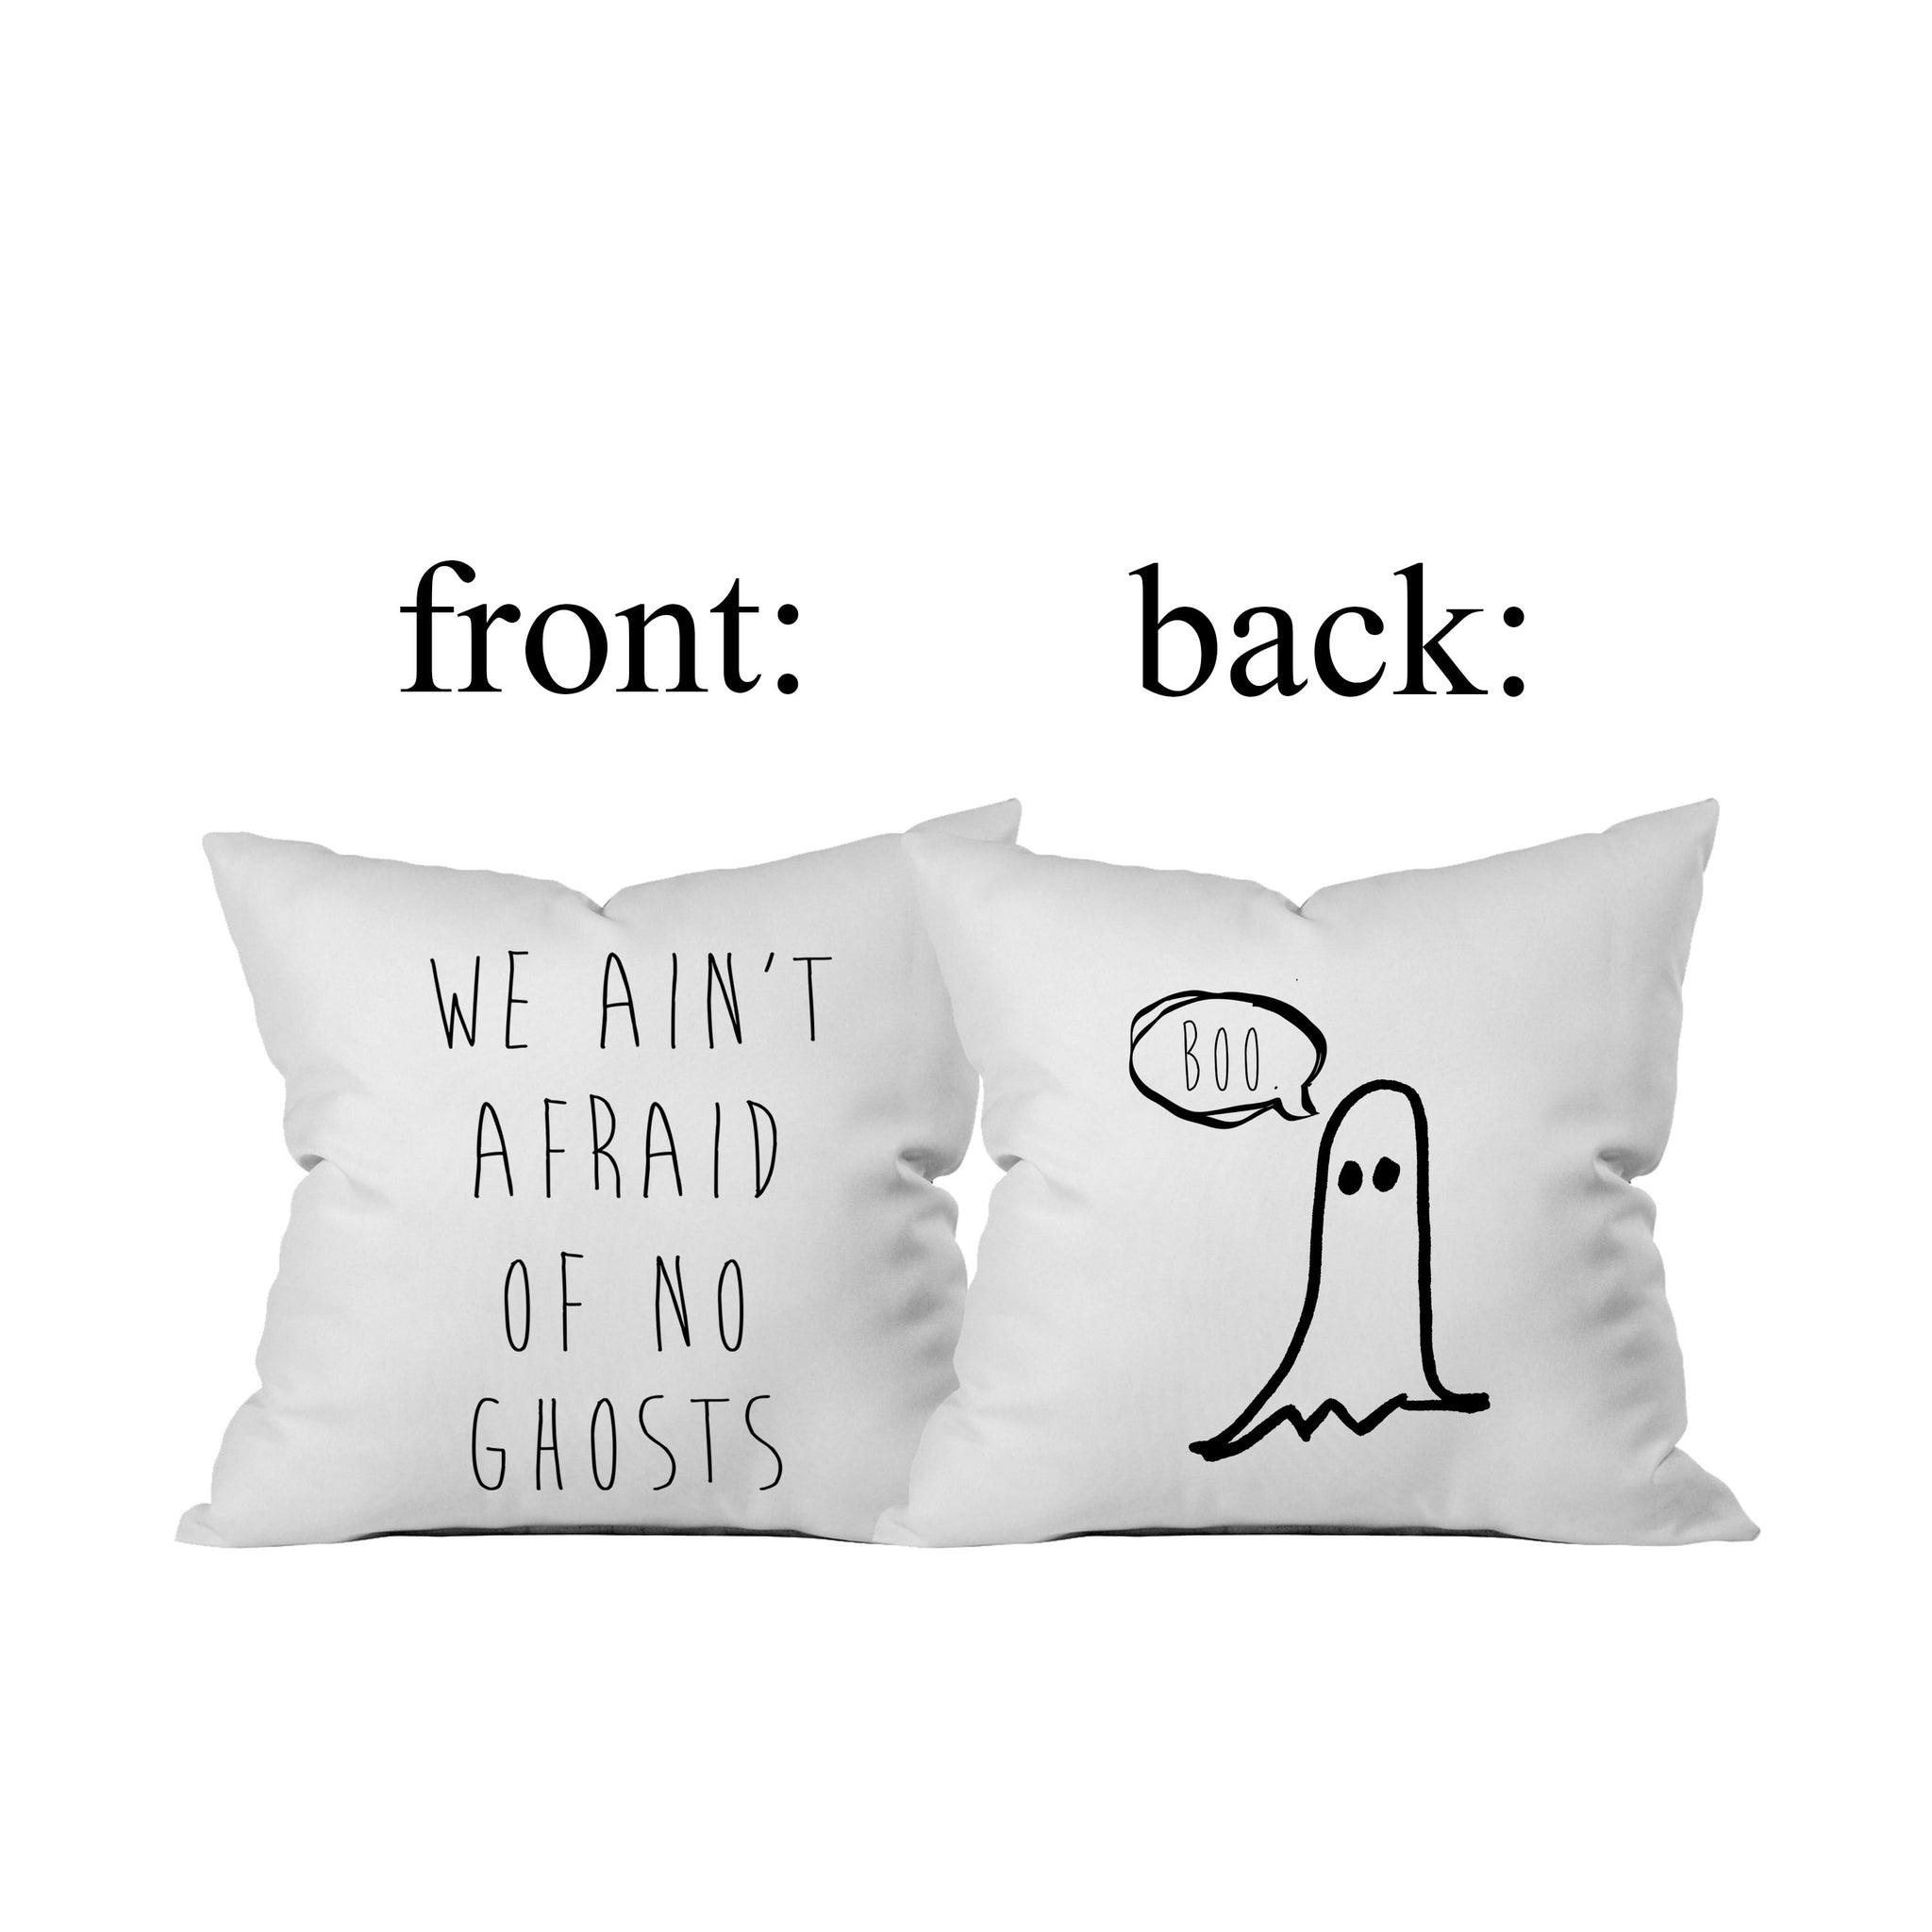 Oh, Susannah Halloween Boo Ghost We Ain't Afraid of No Ghosts Reversible Throw Pillow Cover (1 18X 18 inch, Black)